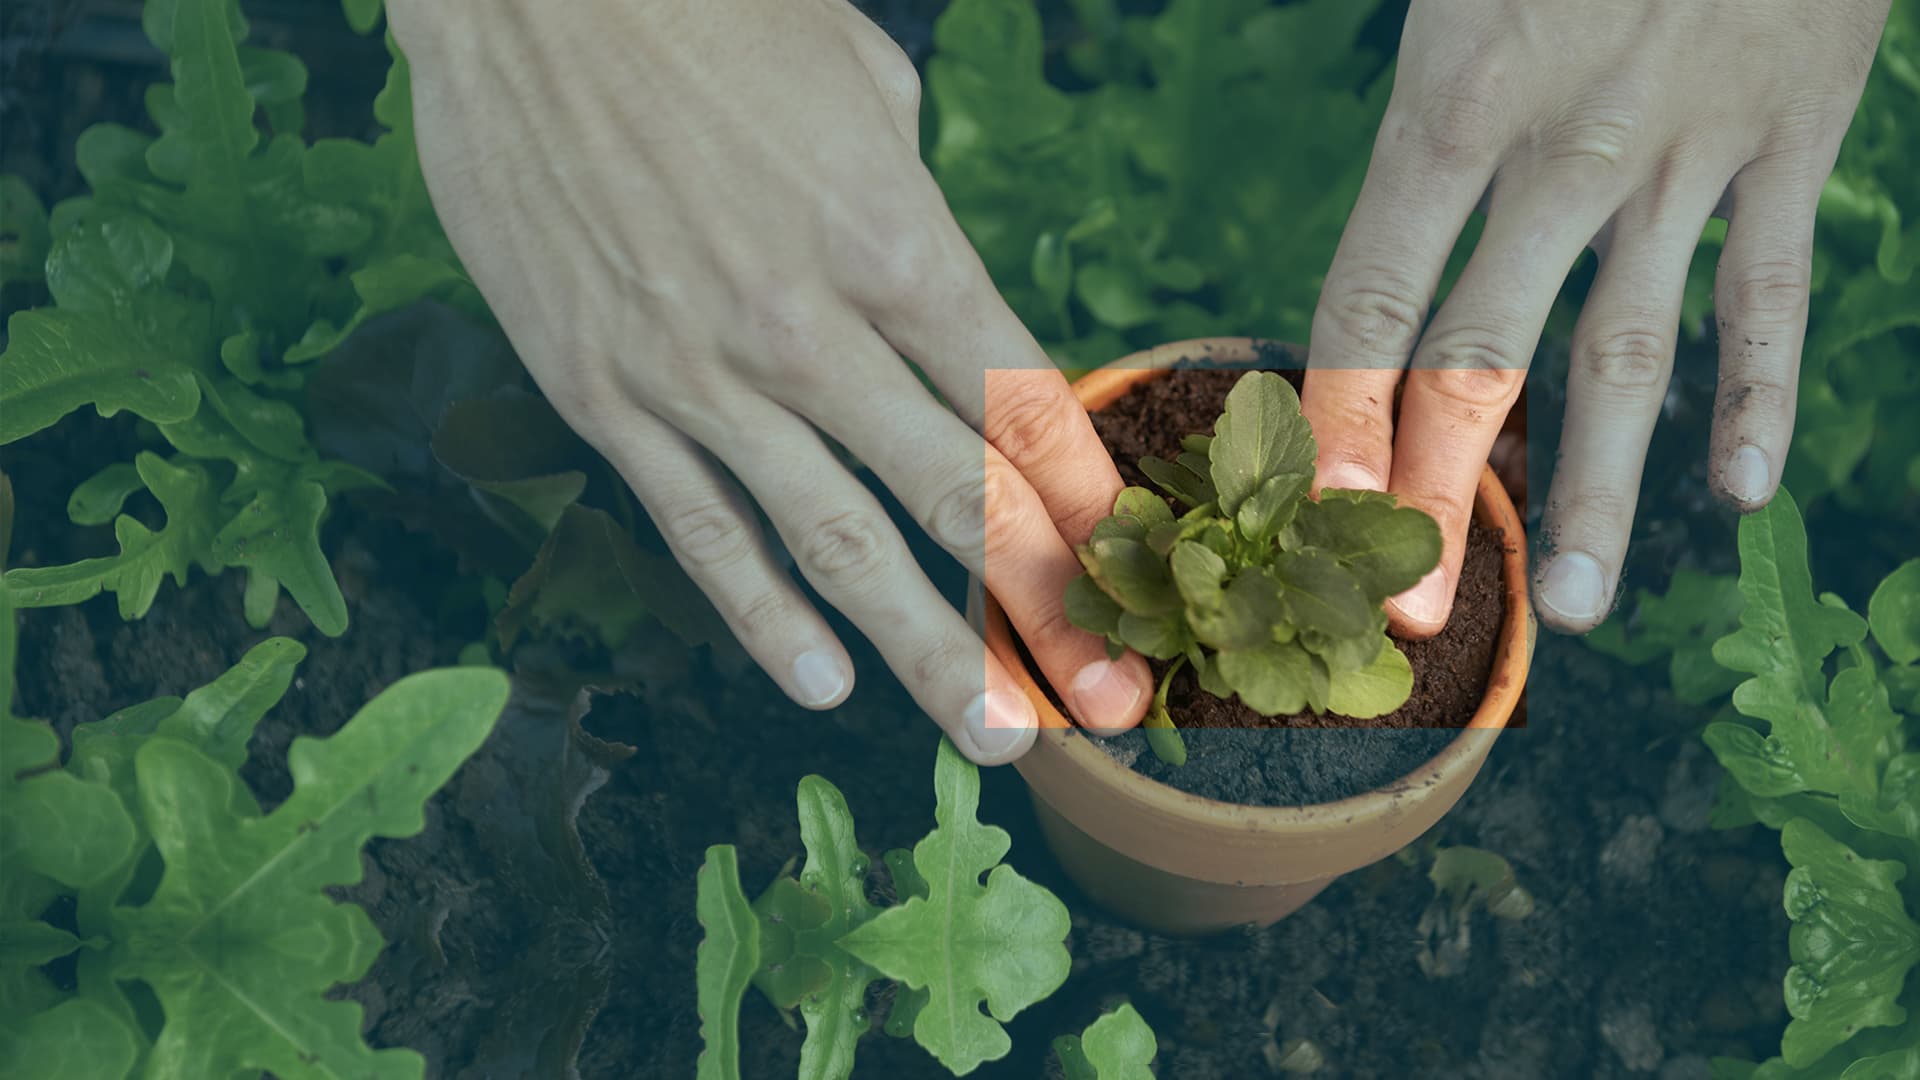 Hands planting a seedling in a pot